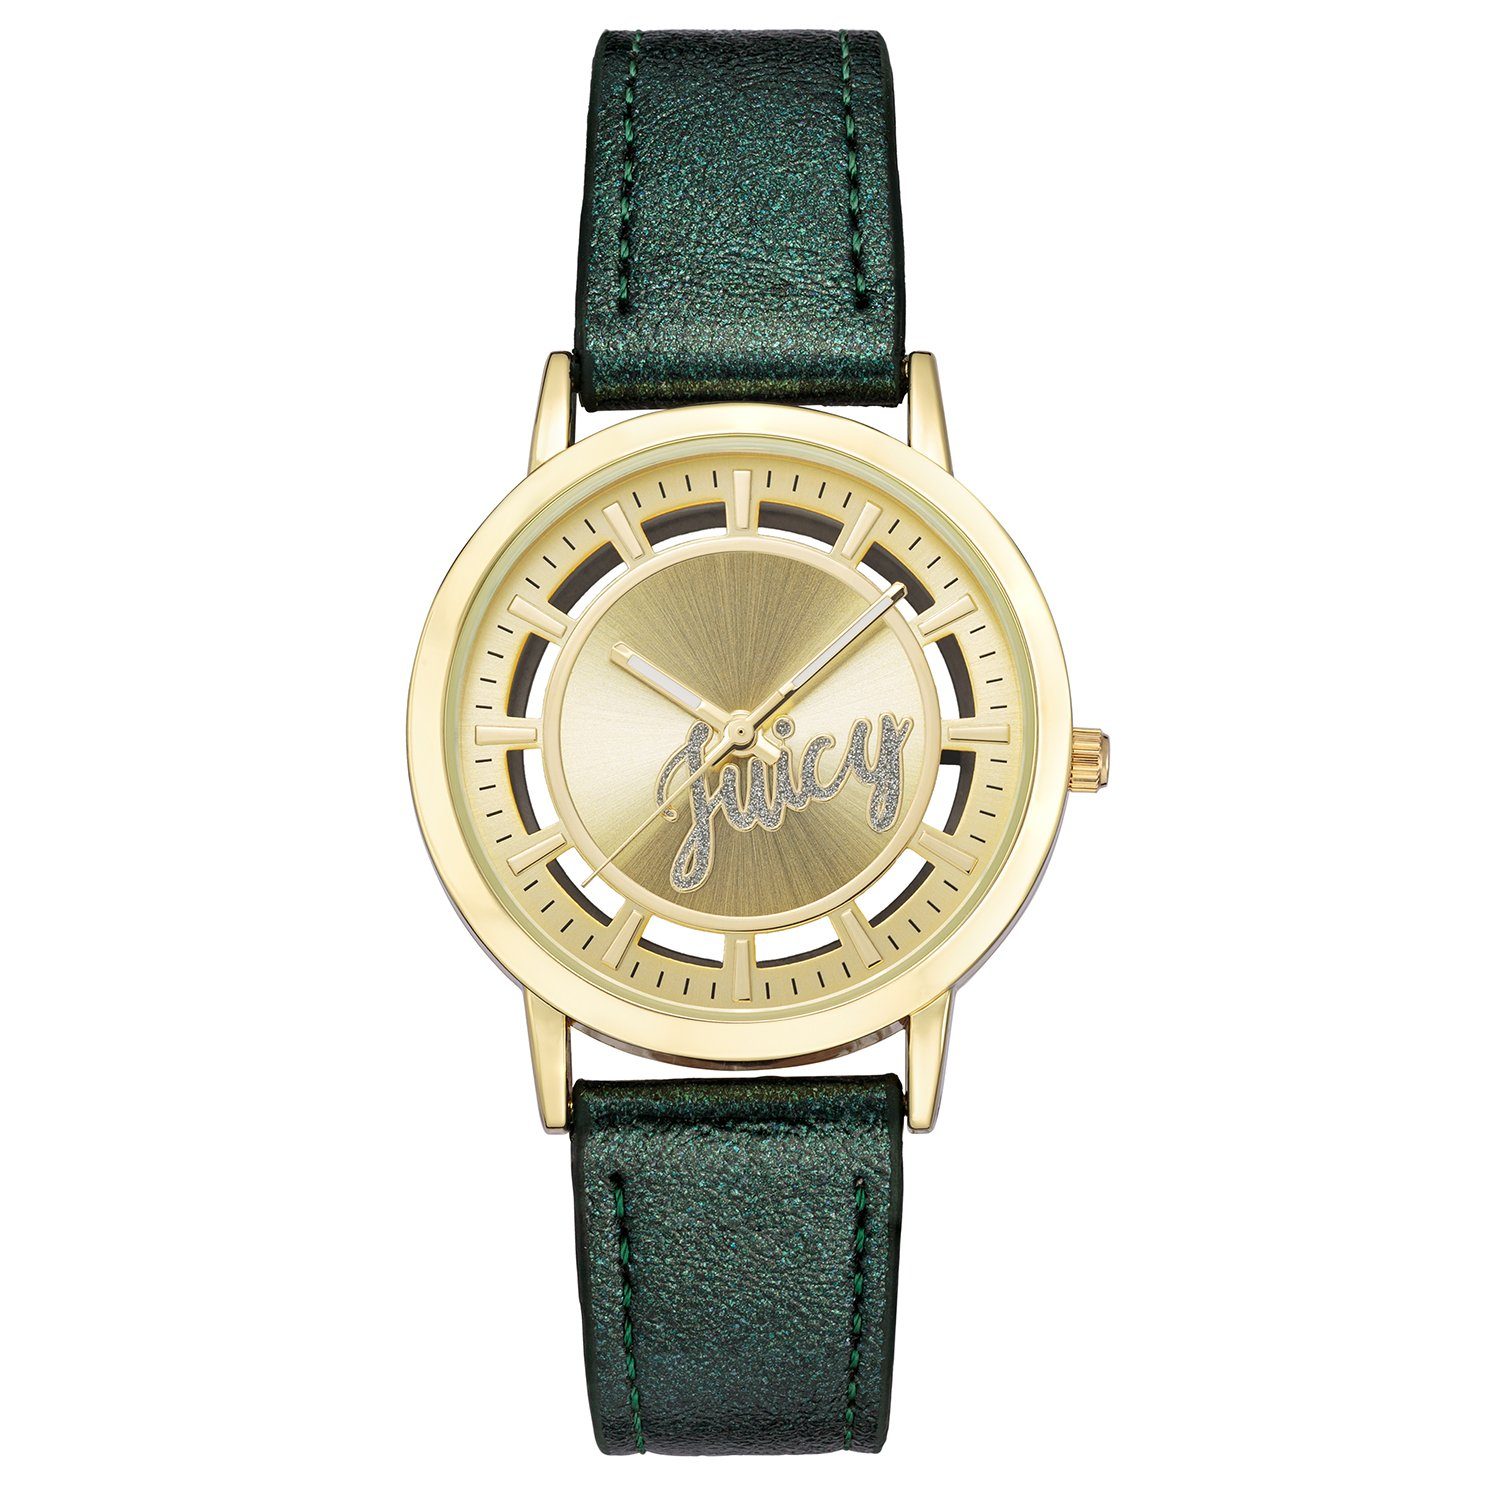 Digitaluhr JC/1214GPGN Juicy Couture